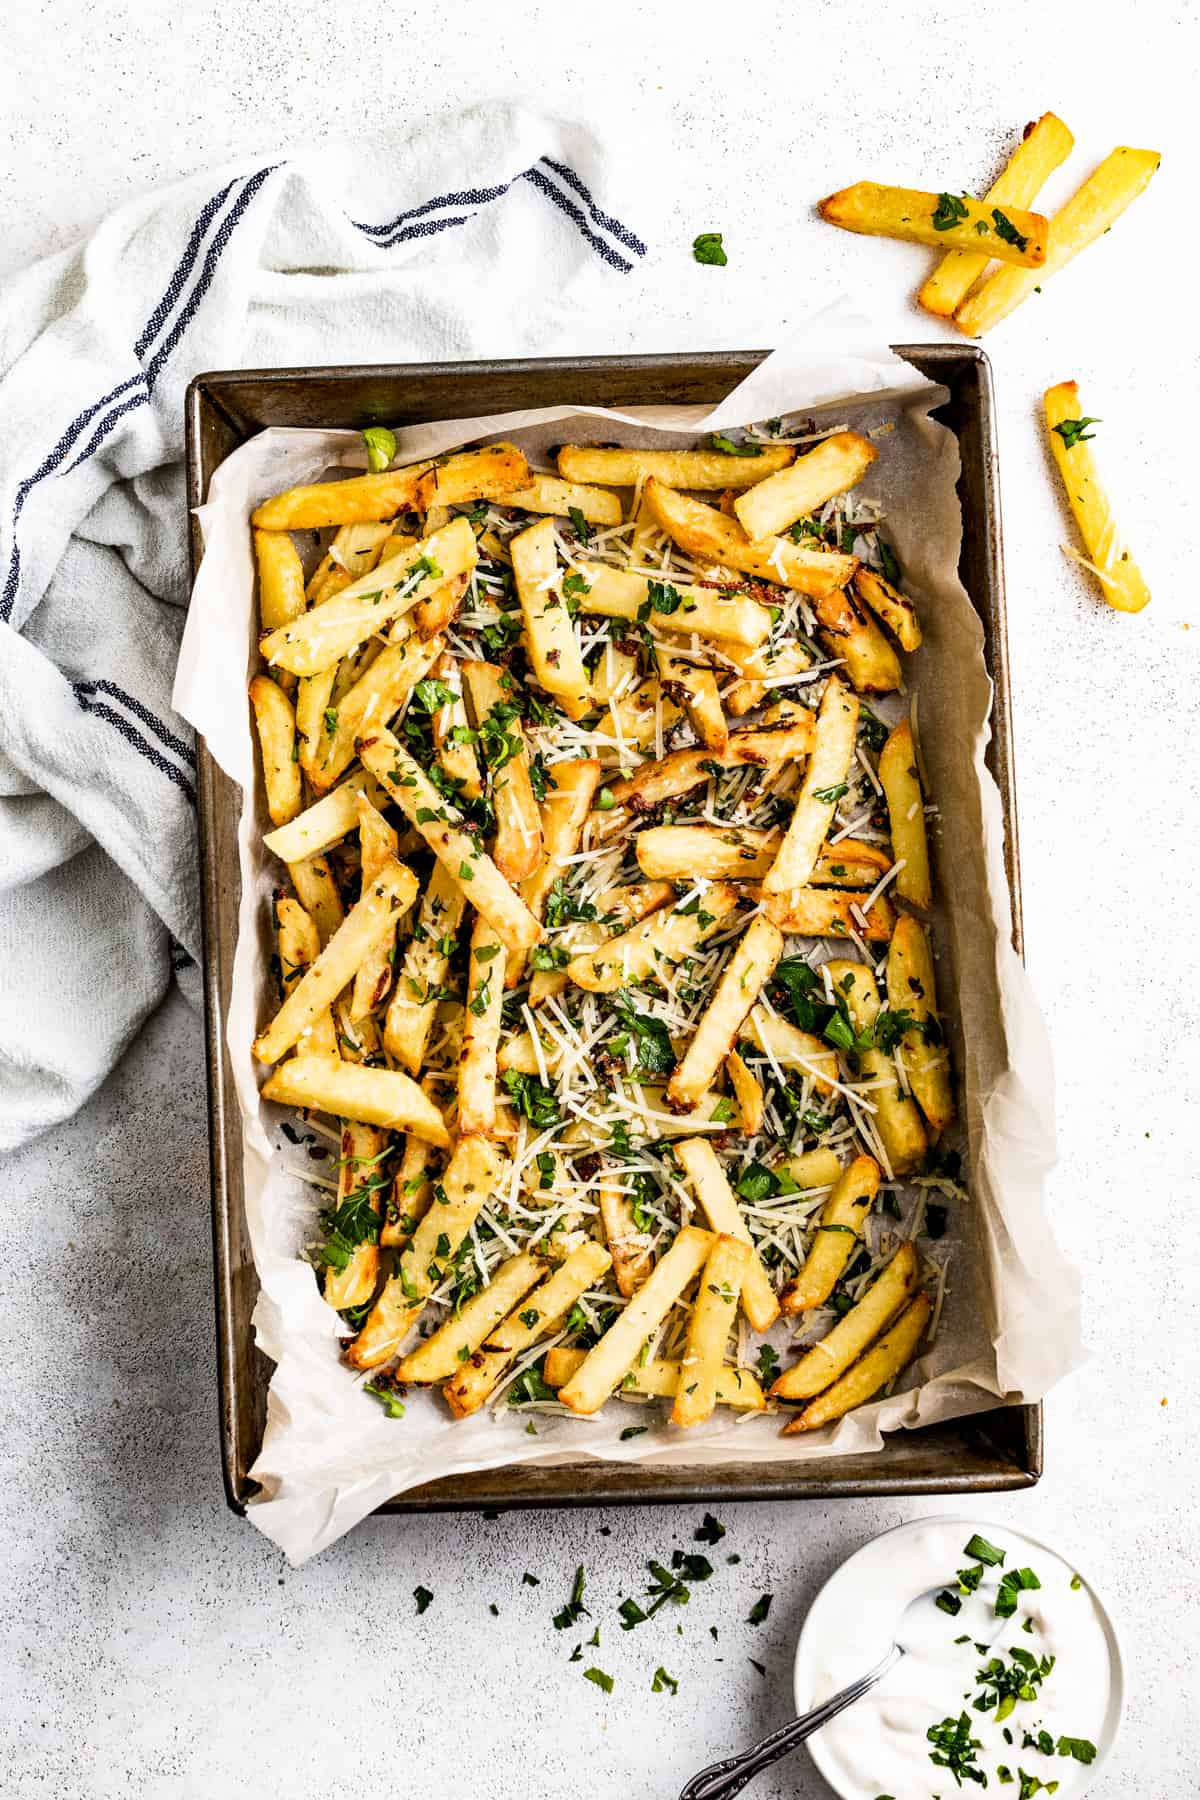 Parmesan truffle fries in a baking pan lined with parchment paper.